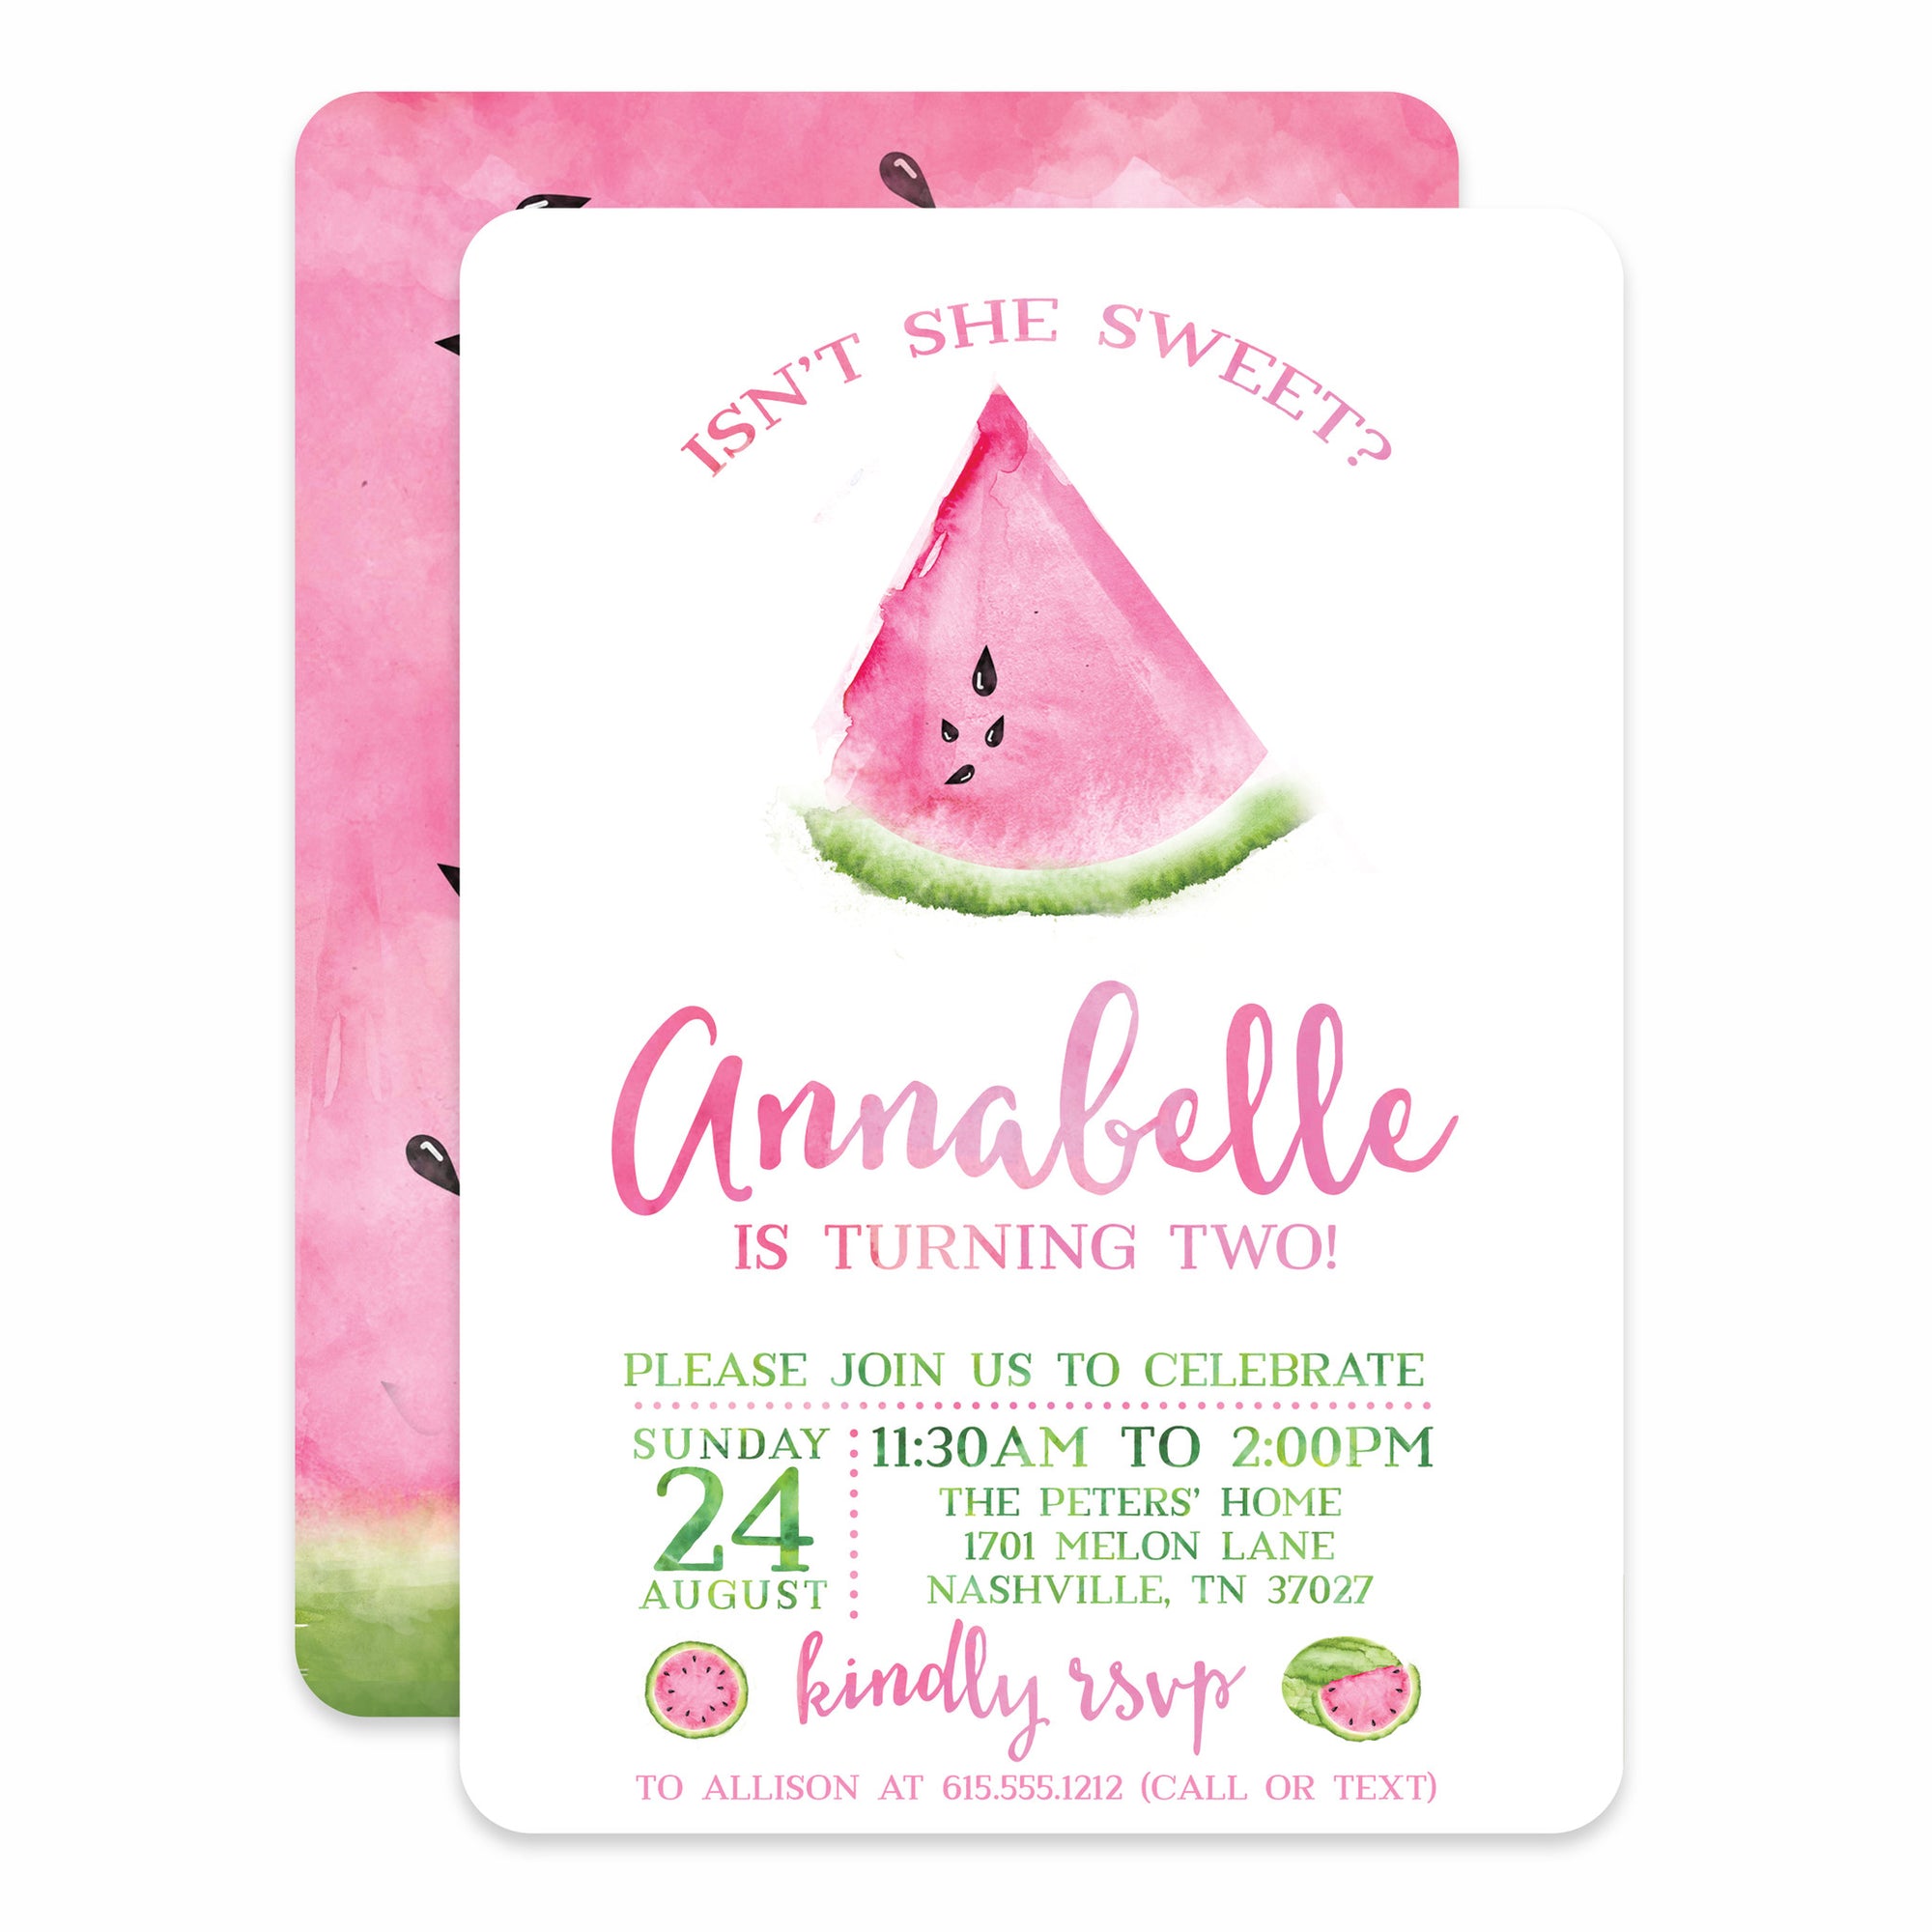 Watermelon Birthday Invitation, featuring a pink watermelon watercolor slice, printed on heavy cardstock, pipsy.com